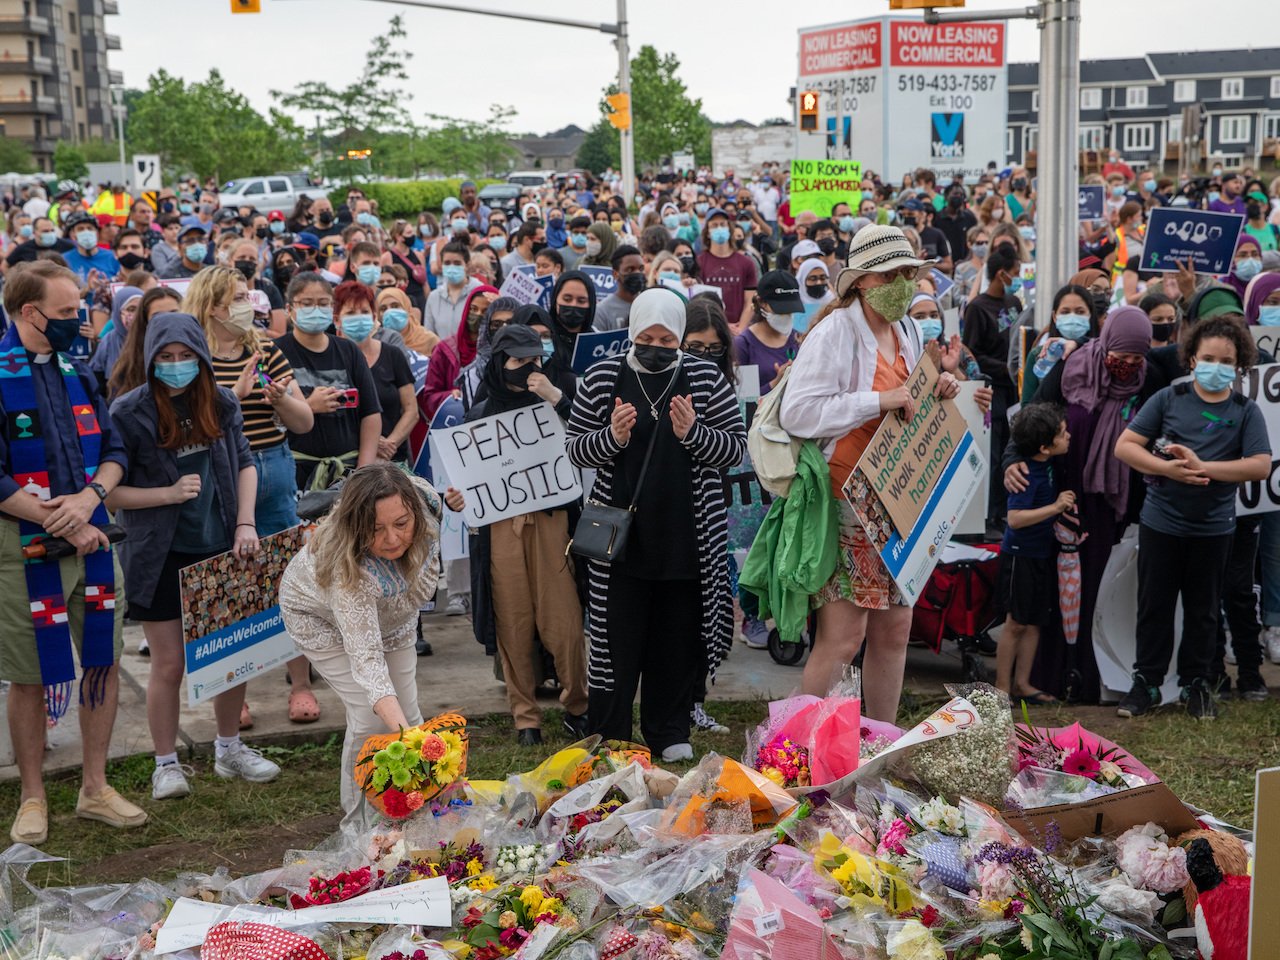 A photo of people at the scene where a Muslim family was killed in a vehicle attack in London, Ont. (Photo: Brett Gundlock/Anadolu Agency via Getty Images)